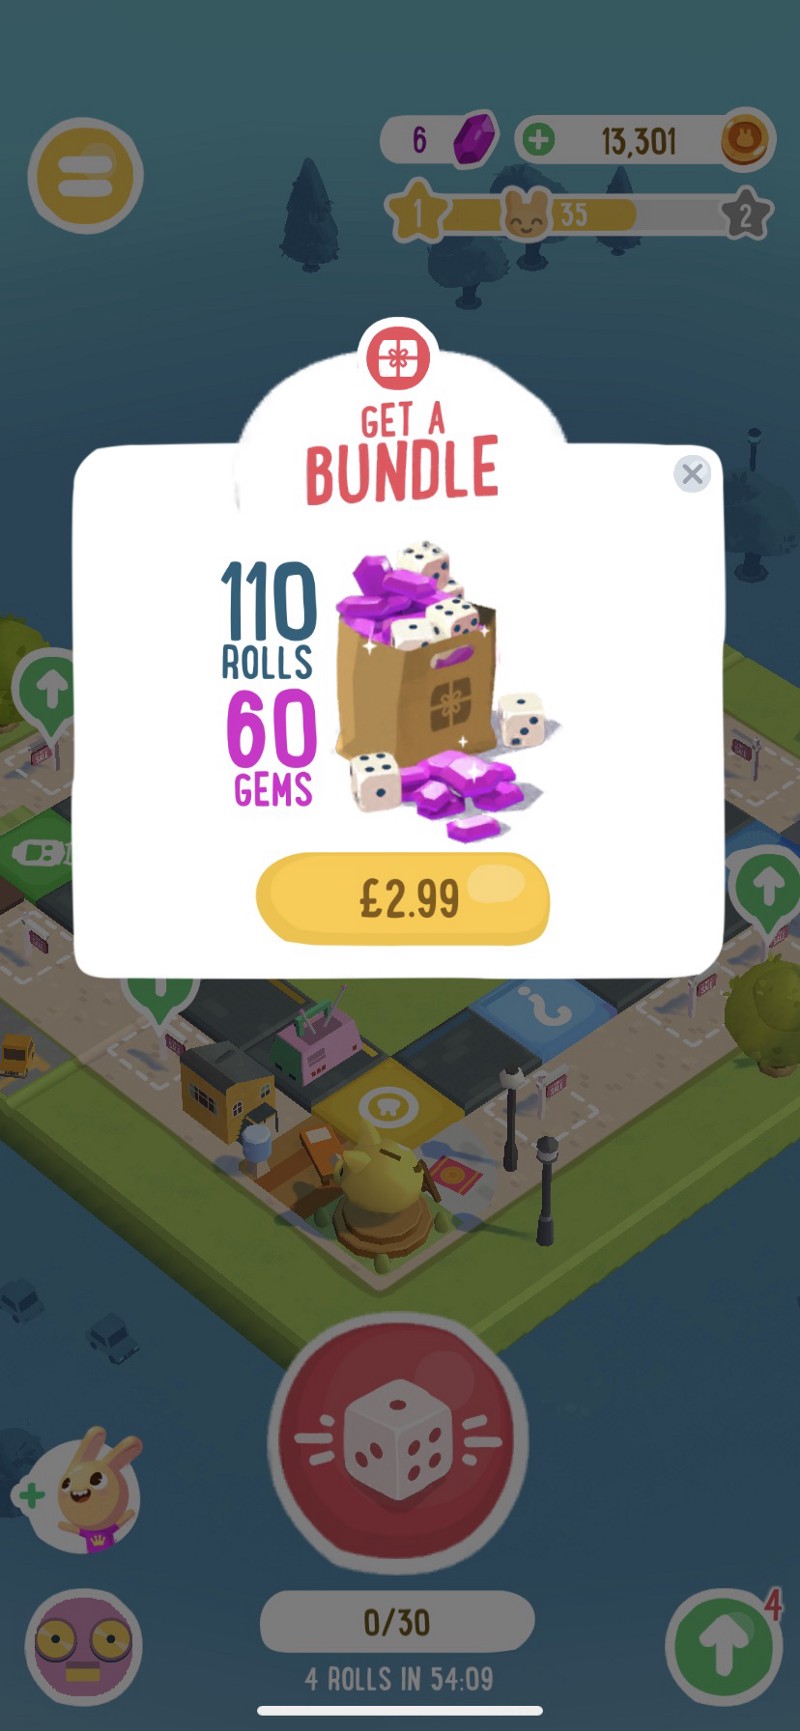 microtransaction modal showing in-game currency to buy